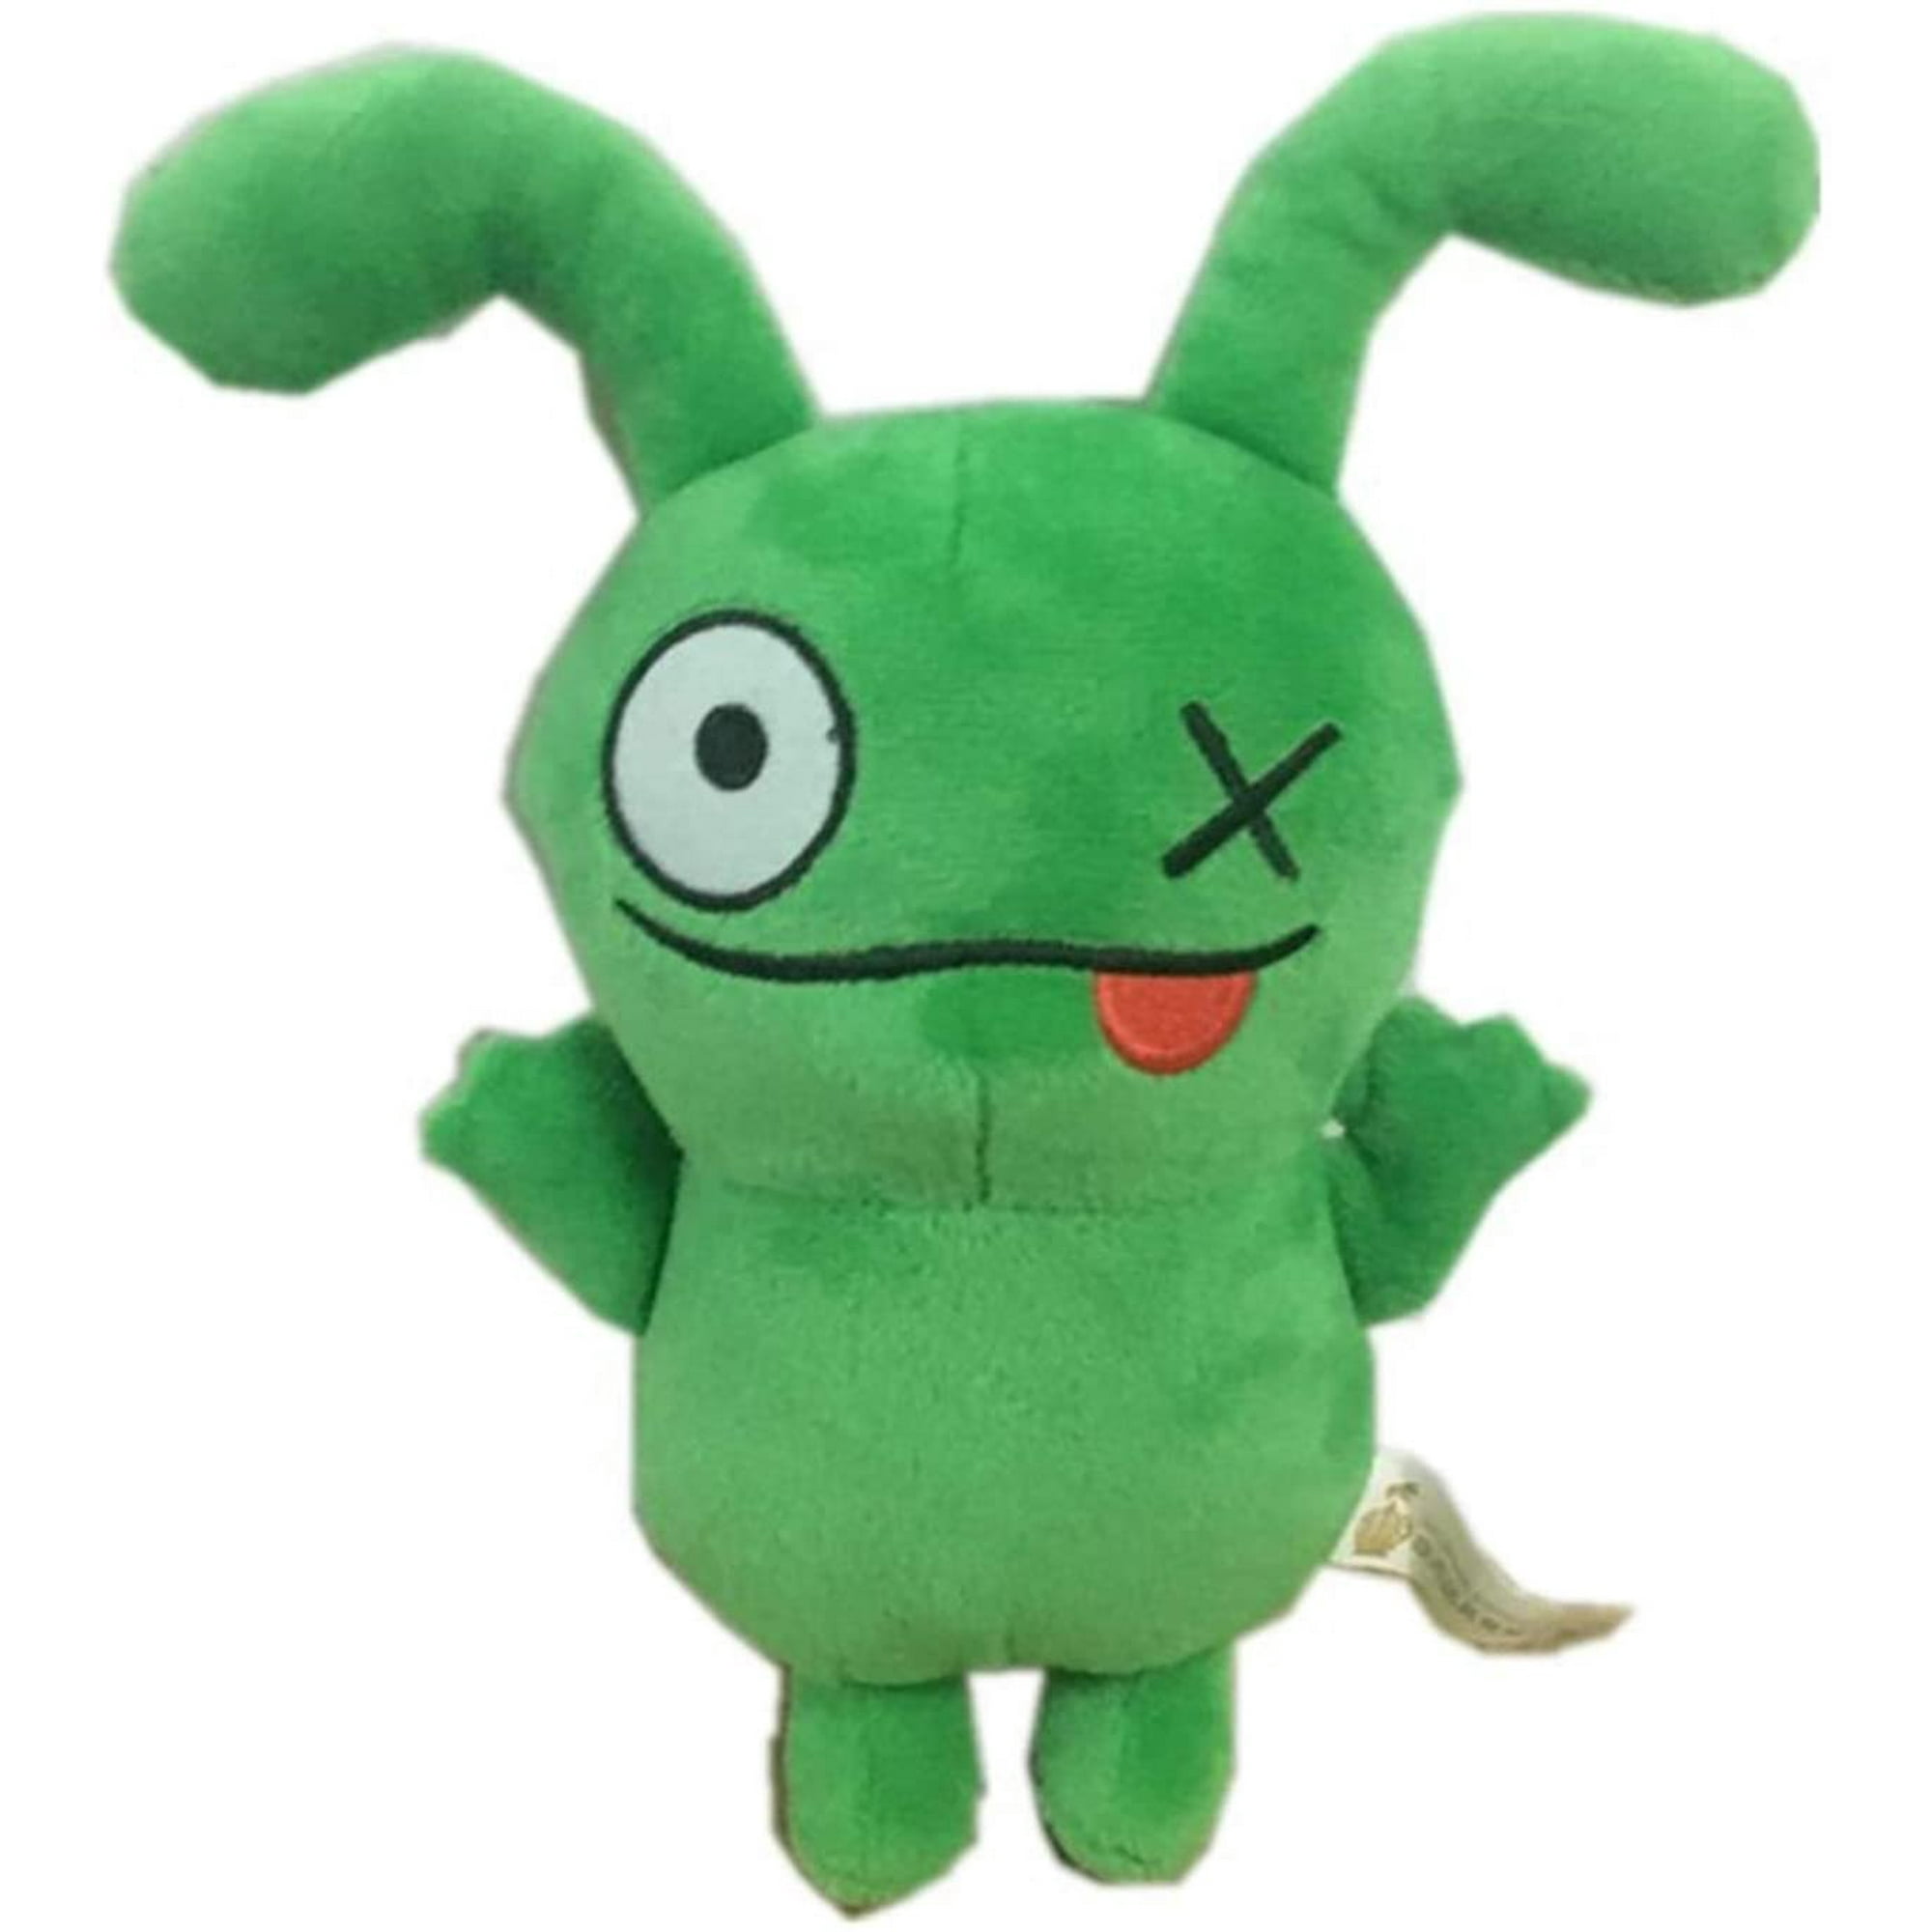 New Arrival 18cm Cartoon Anime Ox Plush Toy Soft Plush Ugly Dolls Gifts for  Children | Walmart Canada